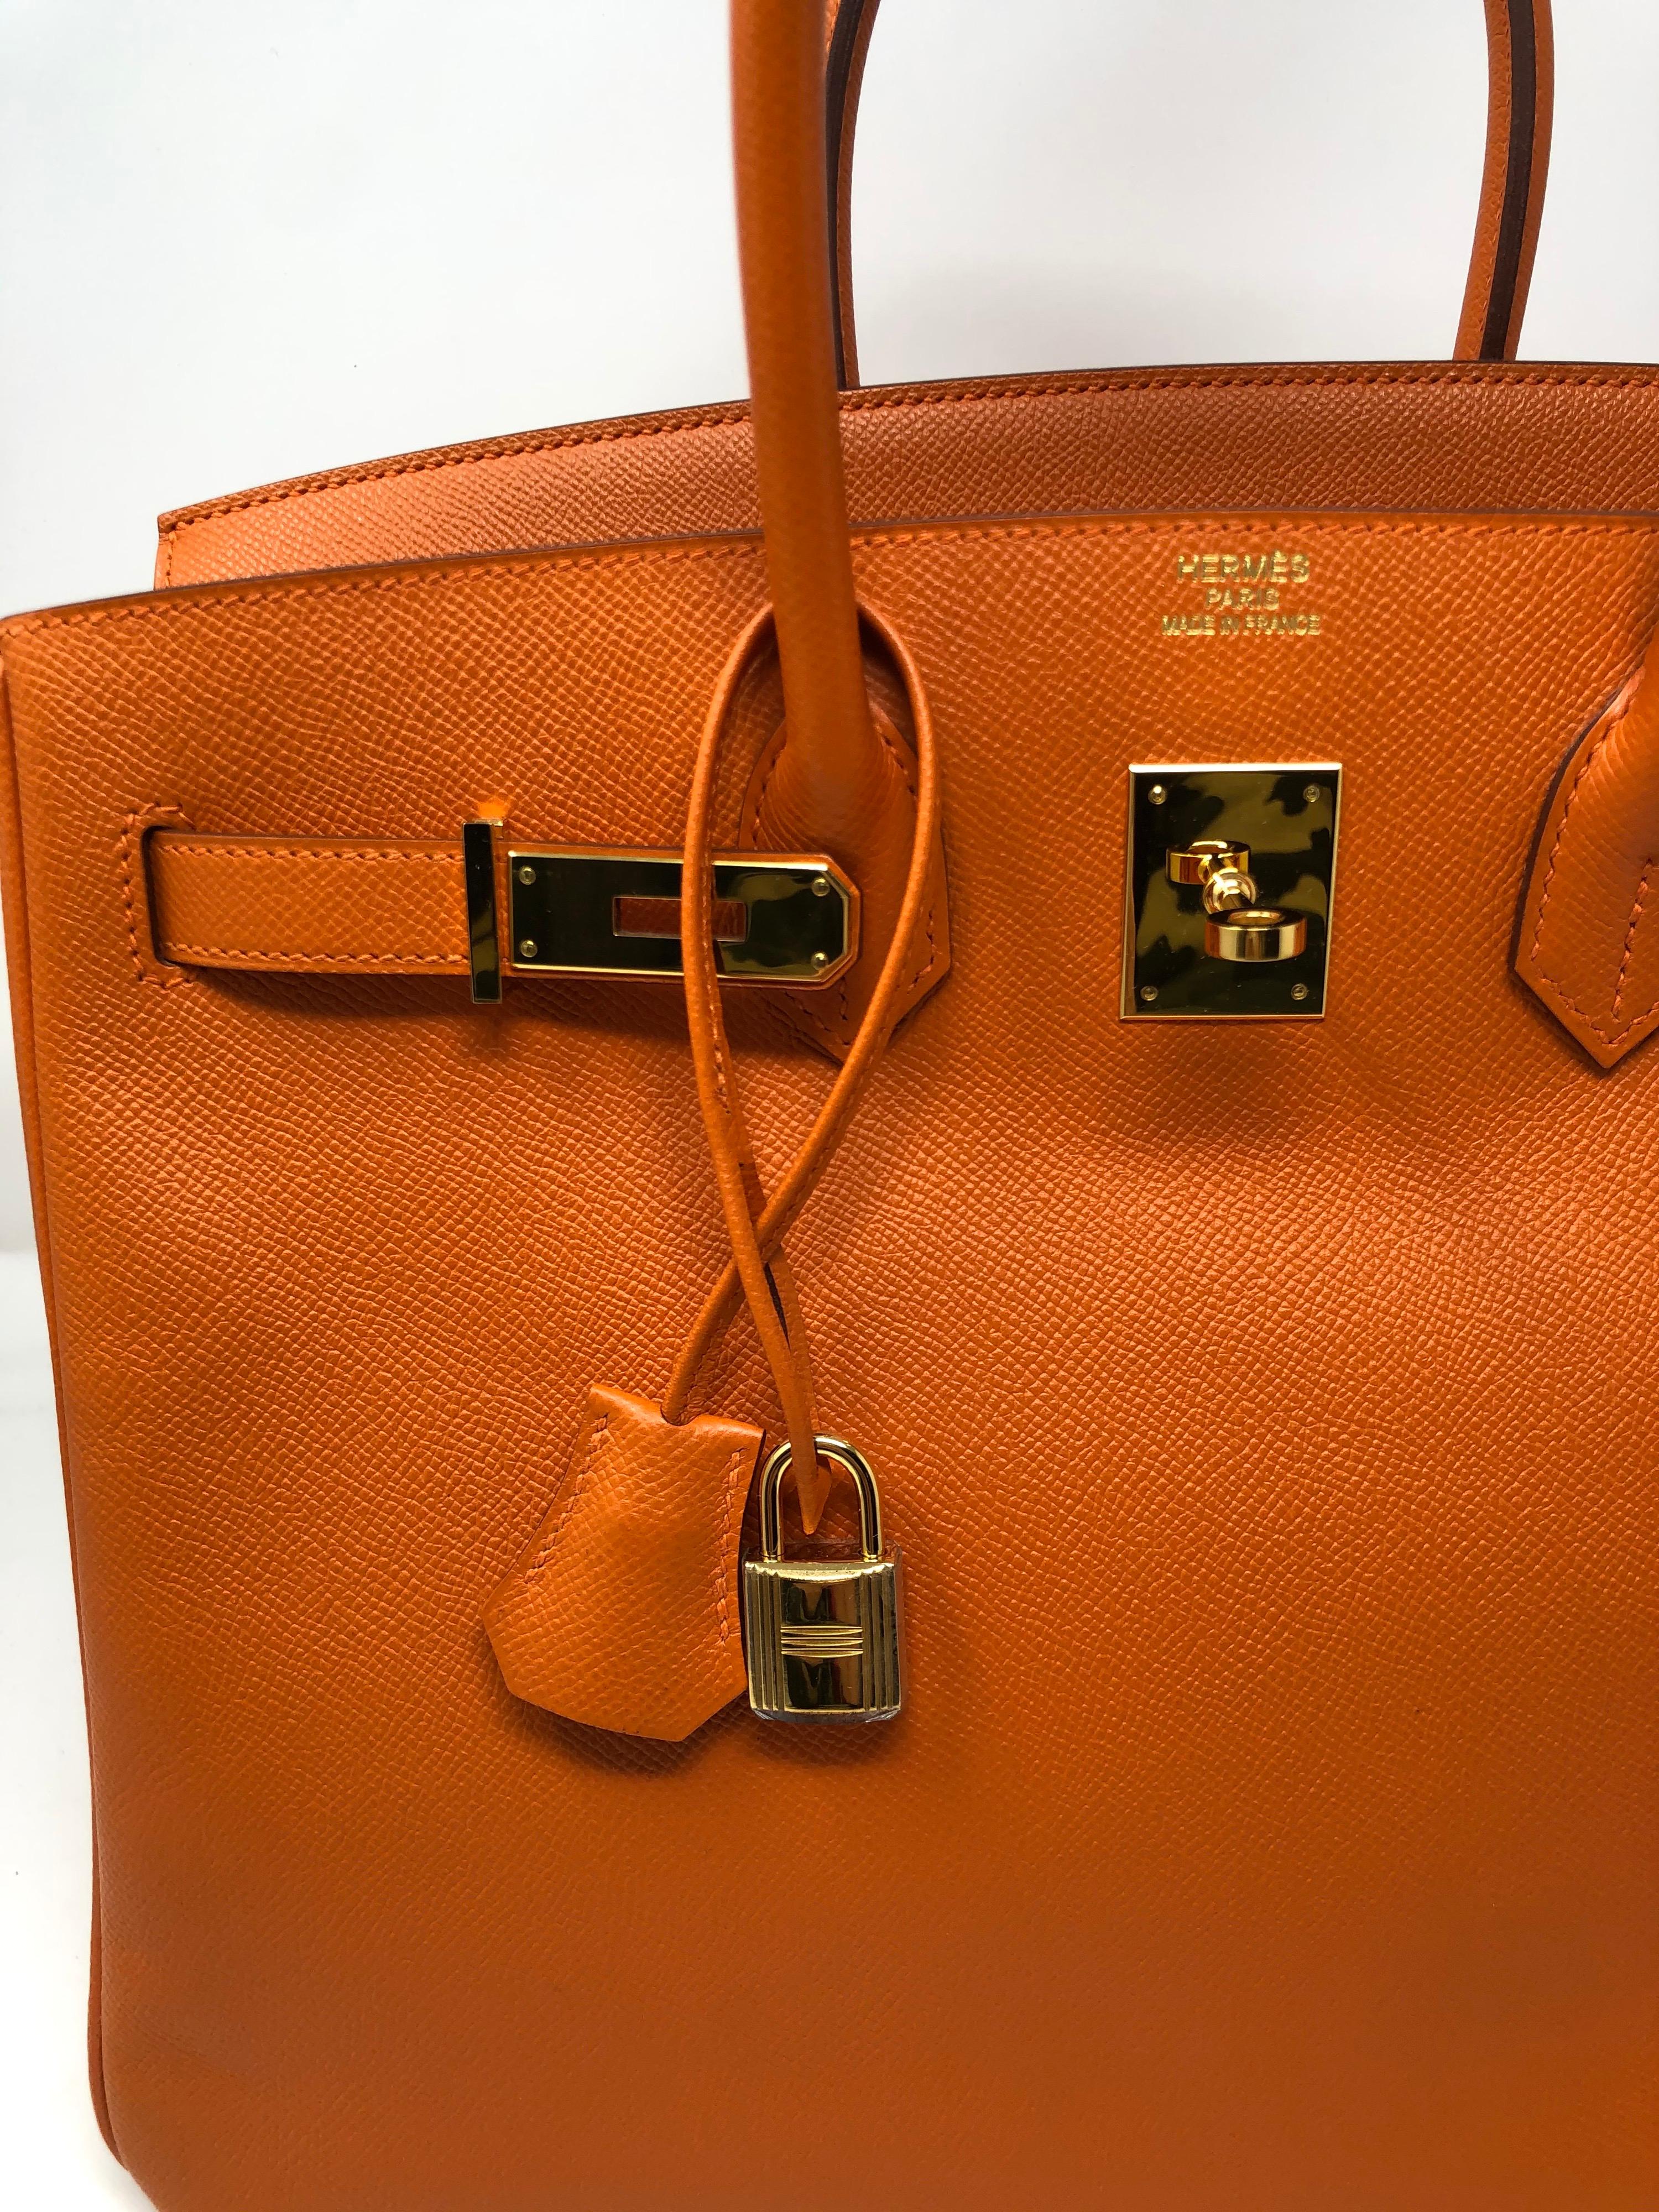 Hermes Orange Birkin 35 with Gold Hardware. Excellent condition. Veau Epsom Leather. From 2012. Includes full set. Will include clochette, lock and keys, dust cover and box. Guaranteed authentic. 